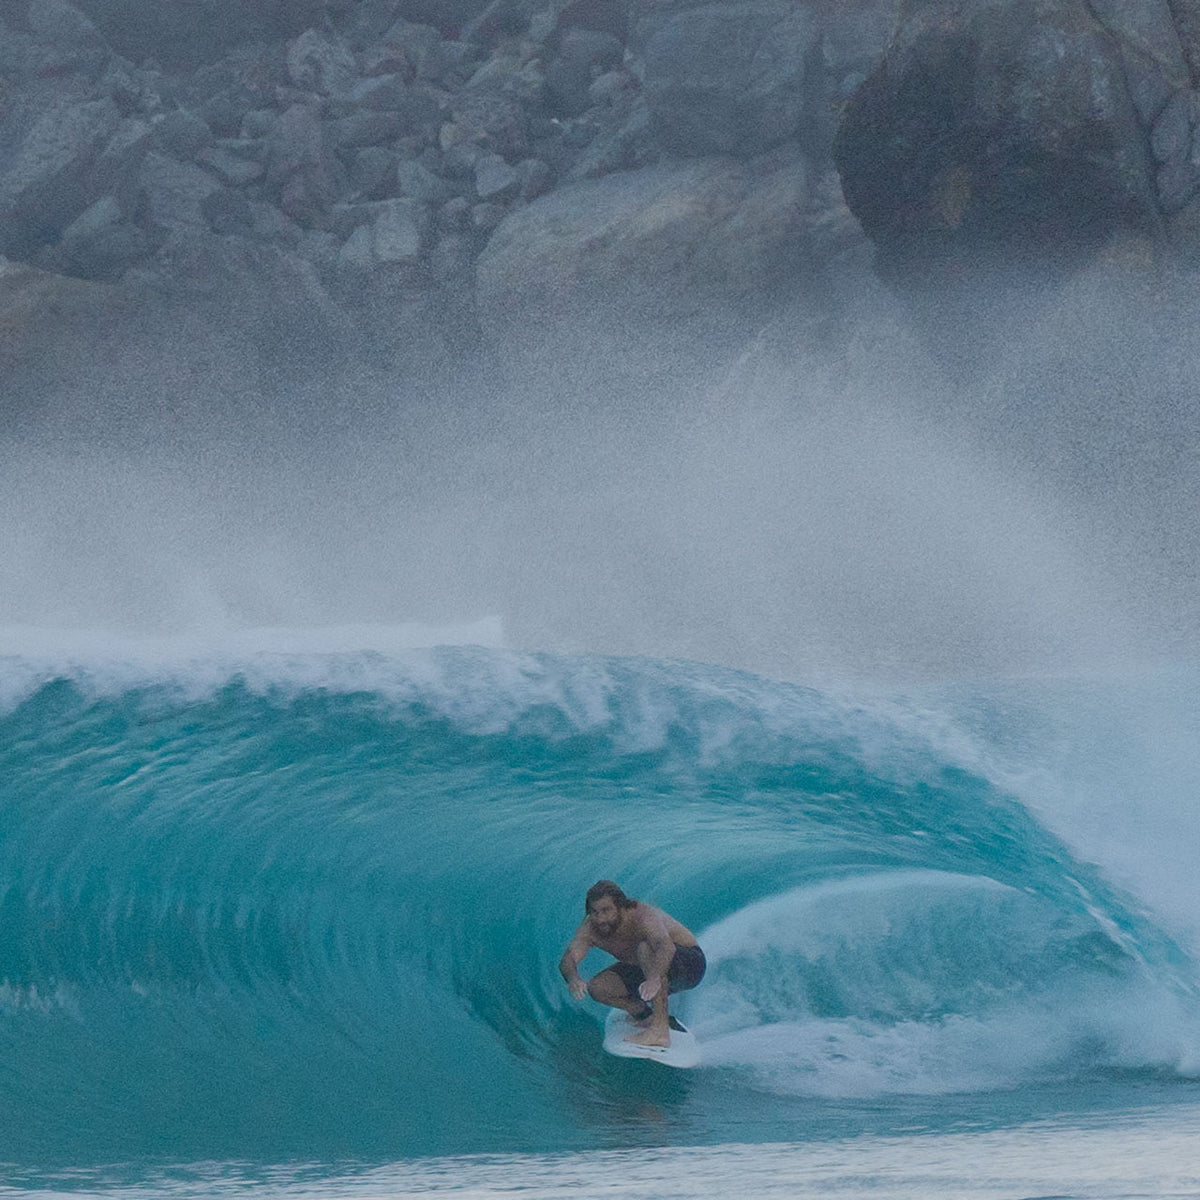 Wade Carmichael barreled in Mexico on 421 Fish - Rusty Surfboards